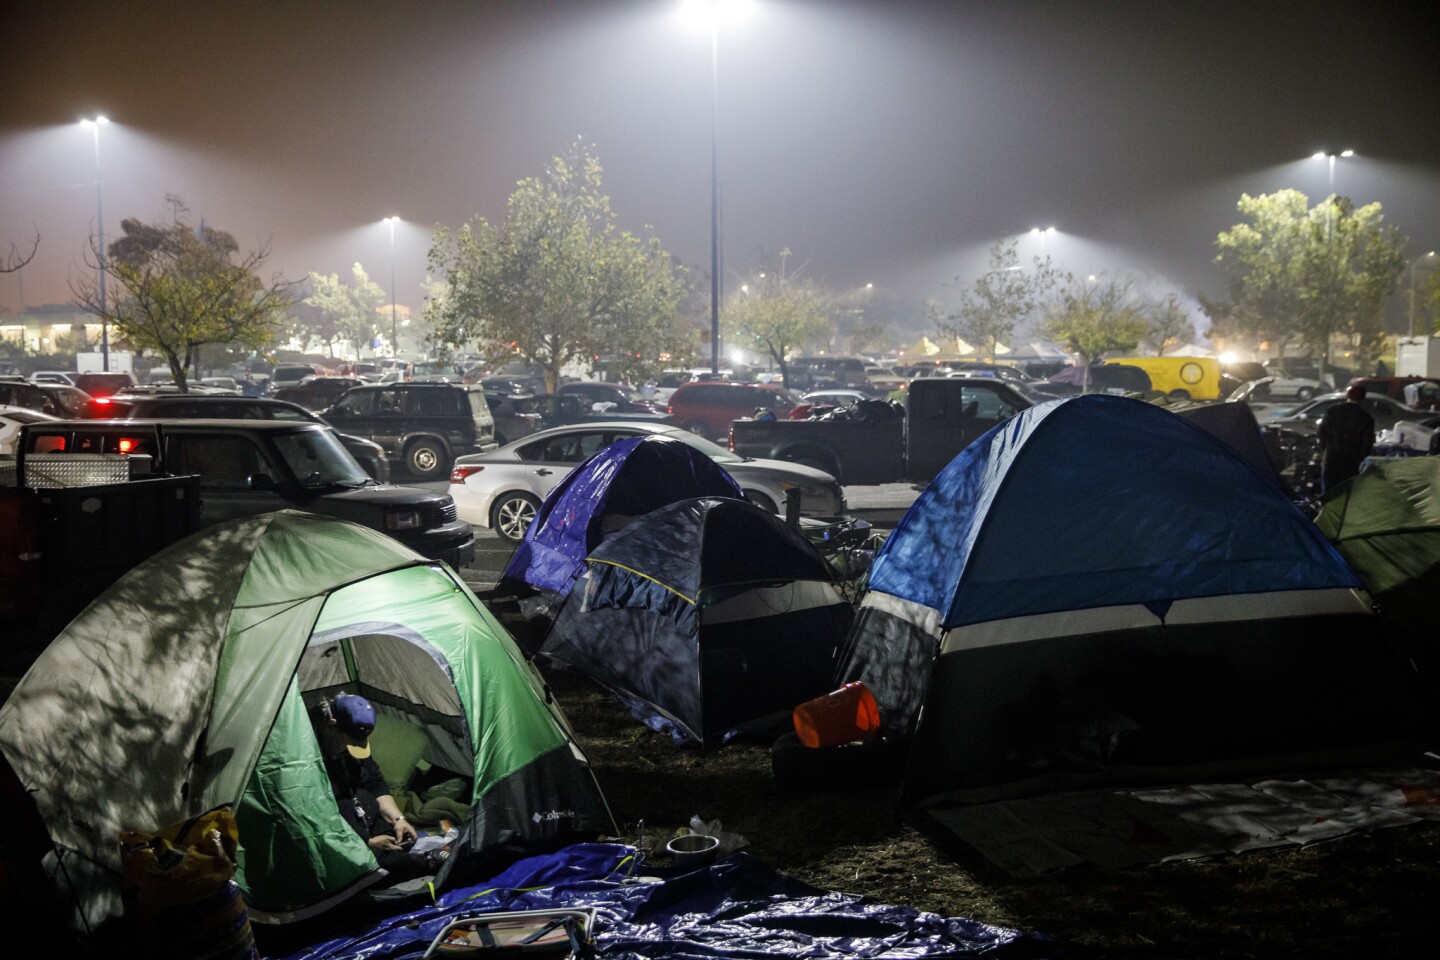 Evacuees from the camp fire set up a tent city at the Walmart parking lot in Chico, Calif.